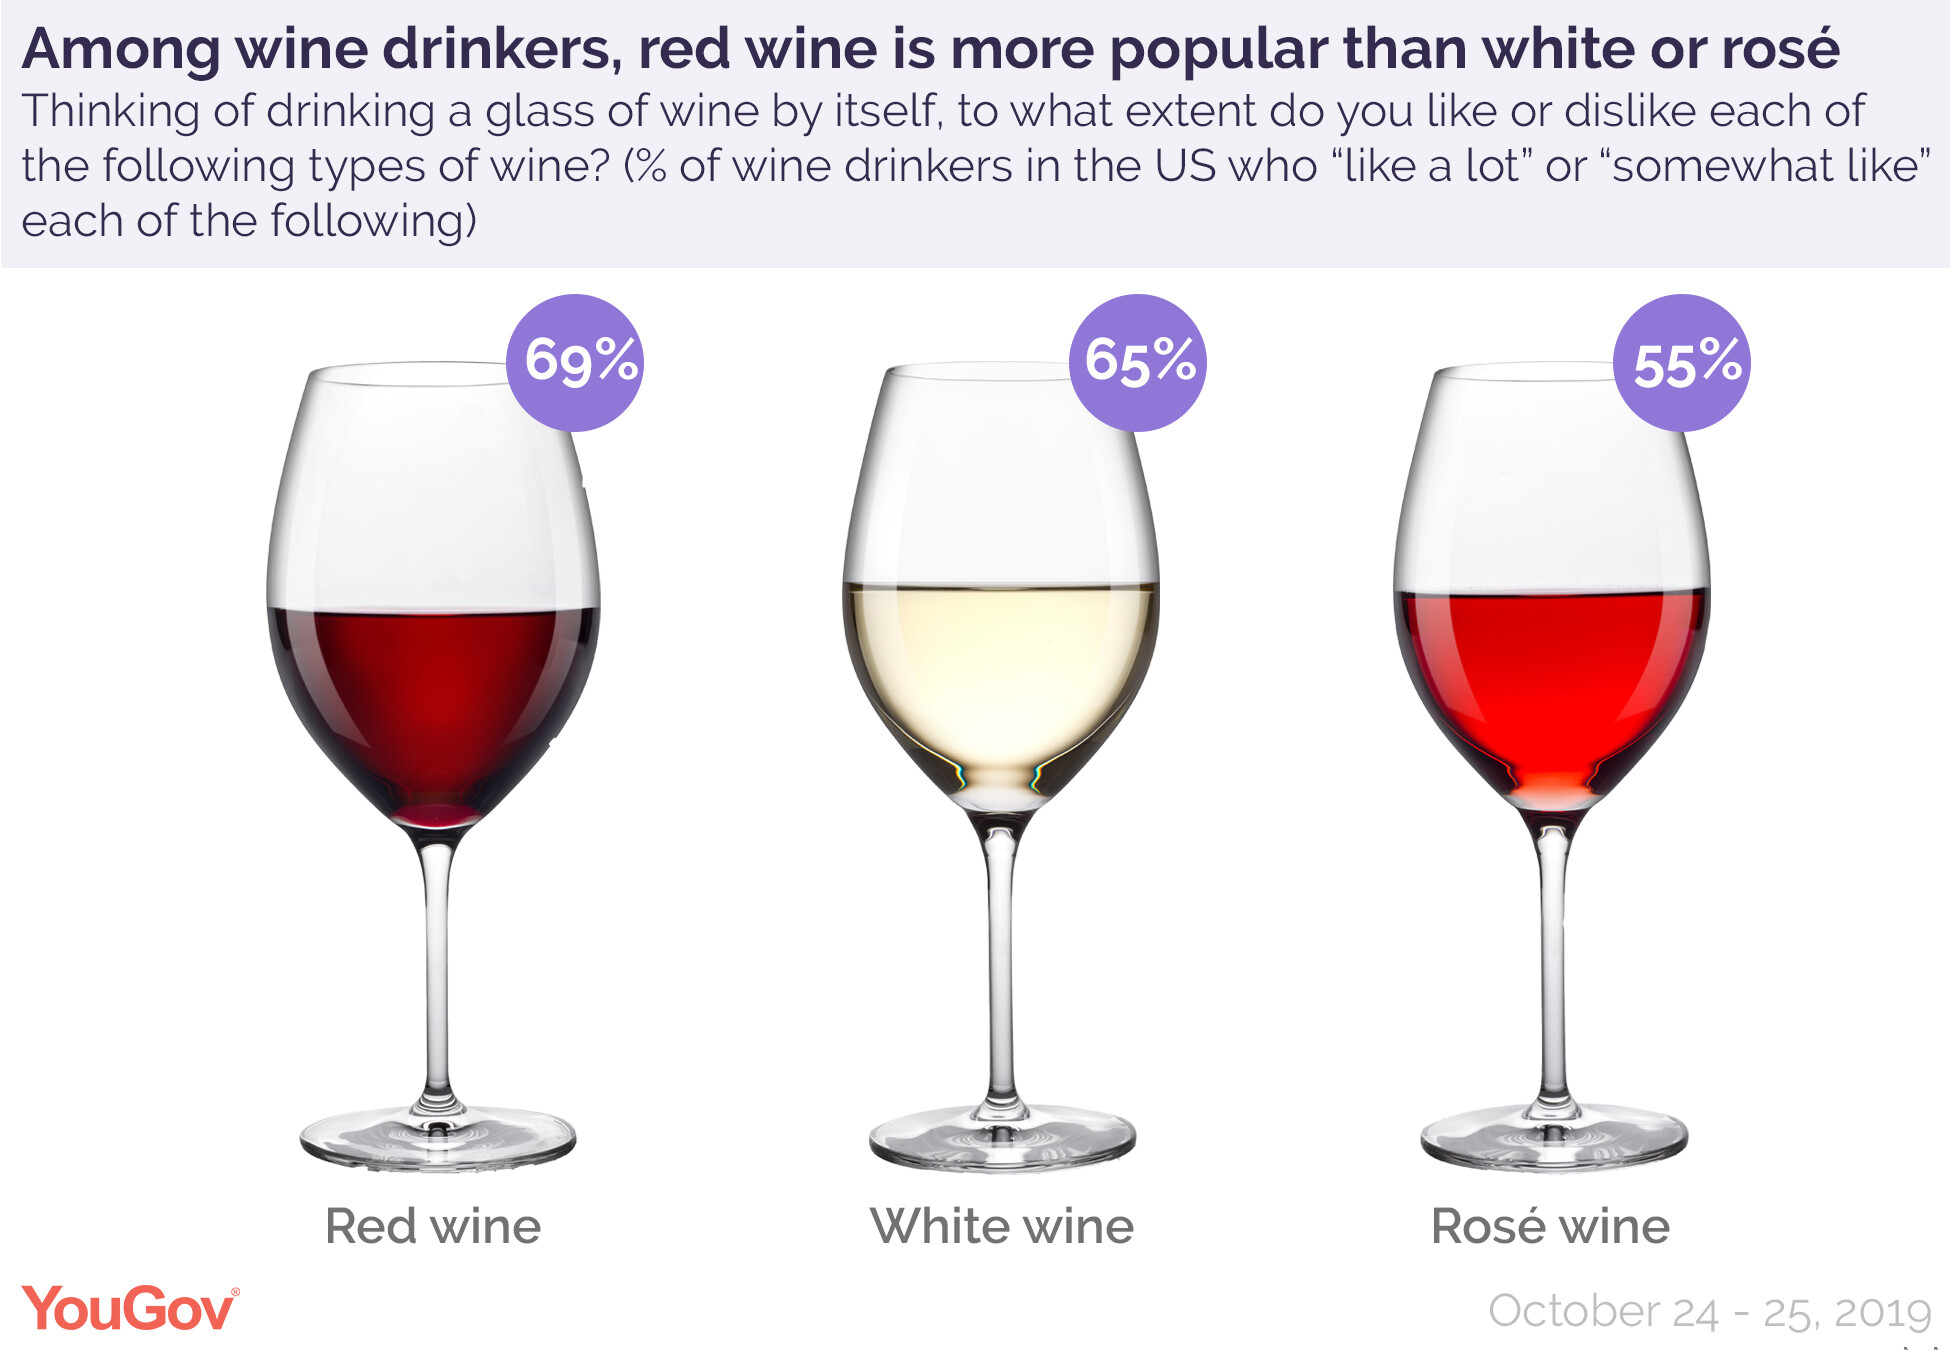 what percent alcohol is wine coolers